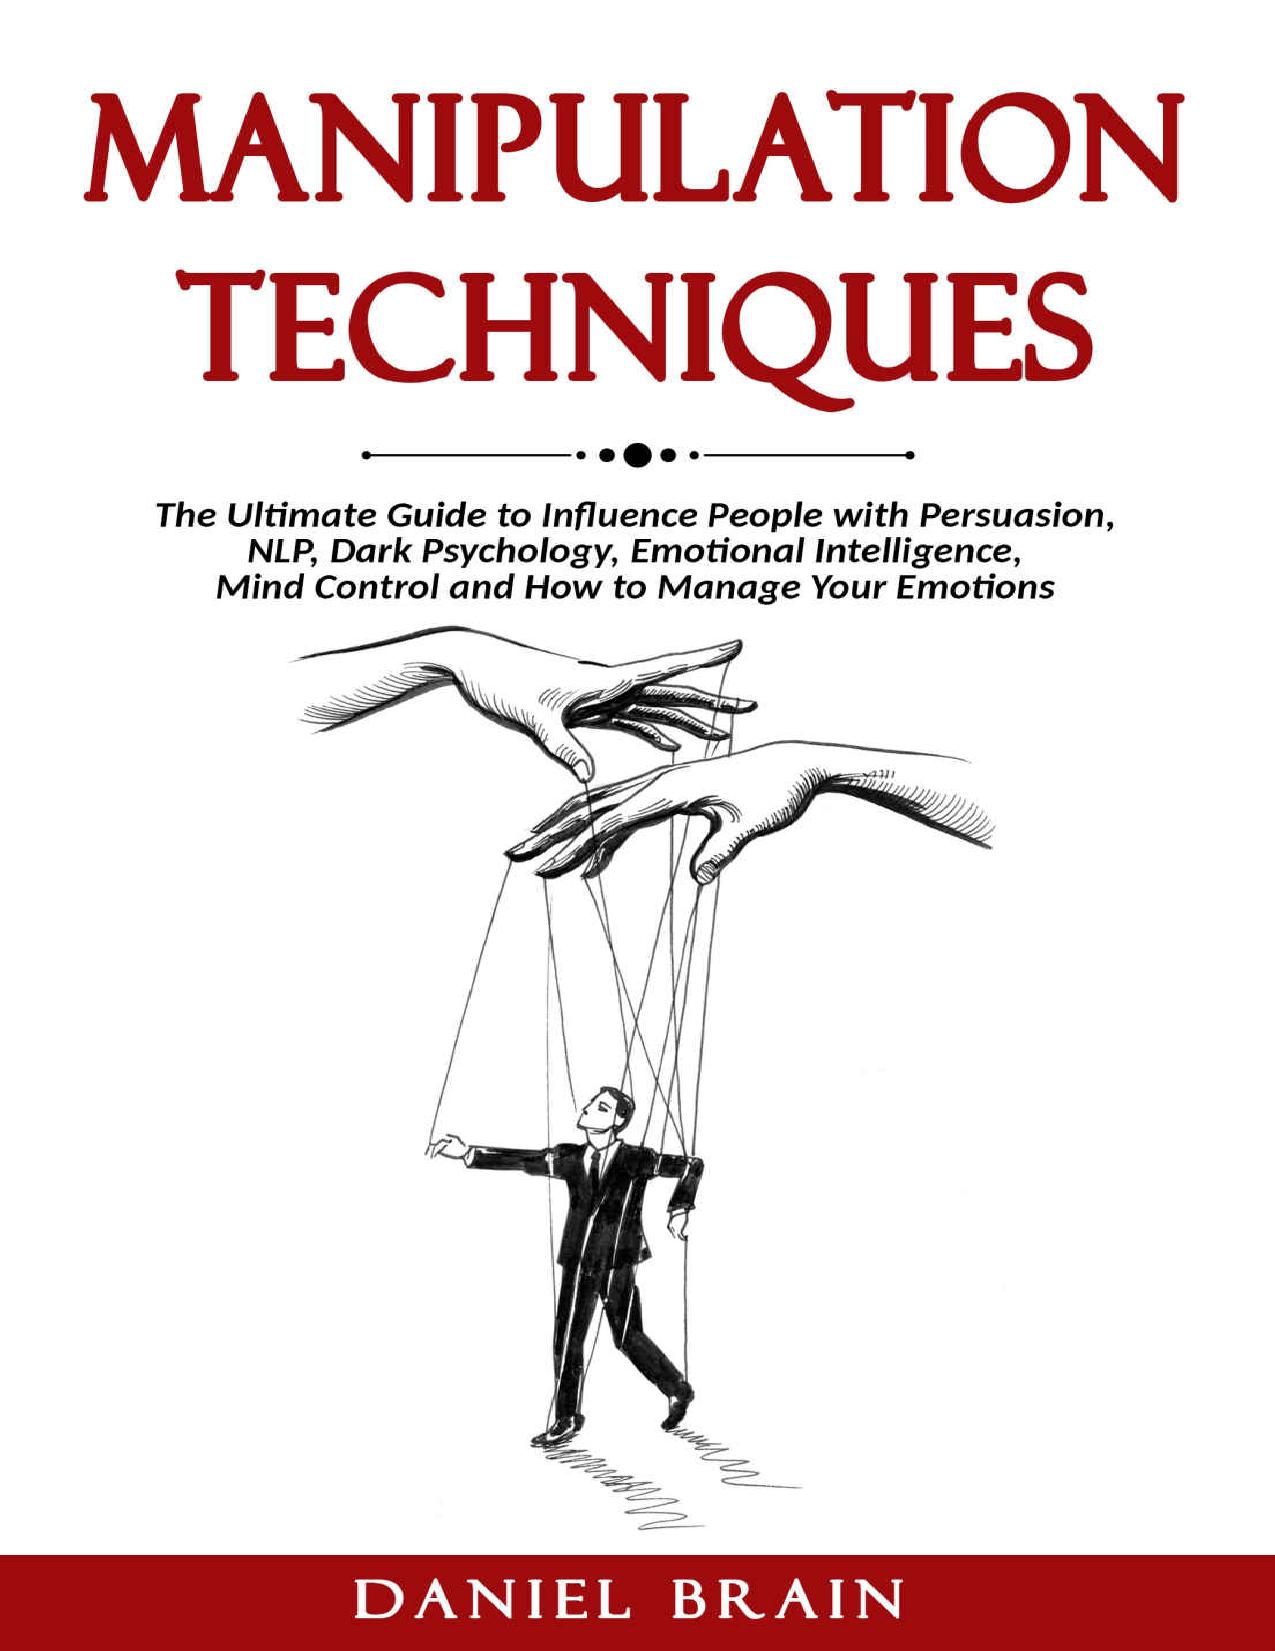 Manipulation Techniques The Ultimate Guide to Influence People with Persuasion, NLP, Dark Psychology, Emotional Intelligence, Mind Control and How to Manage Your Emotions by Daniel Brain